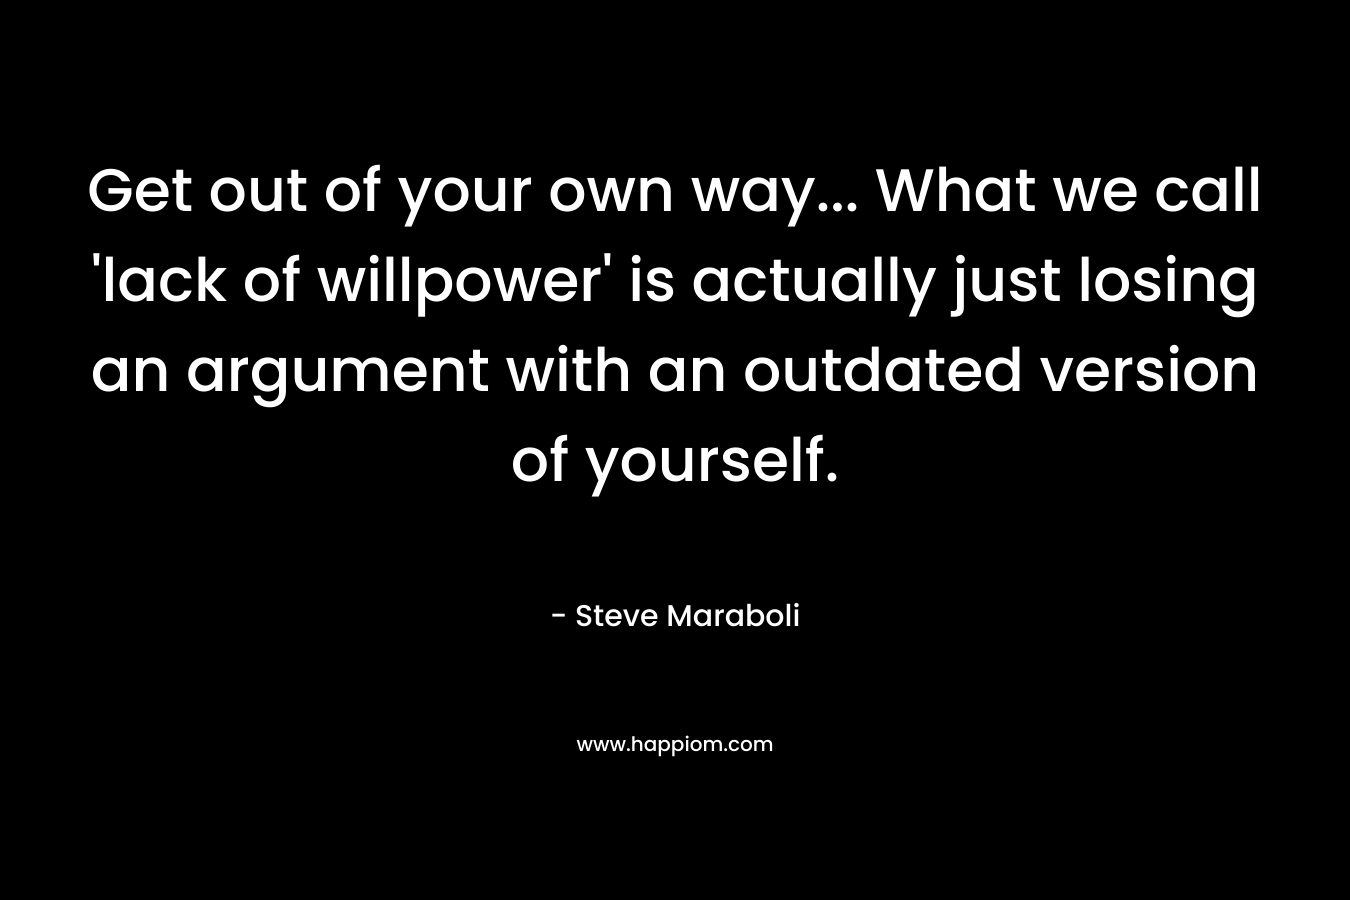 Get out of your own way... What we call 'lack of willpower' is actually just losing an argument with an outdated version of yourself.